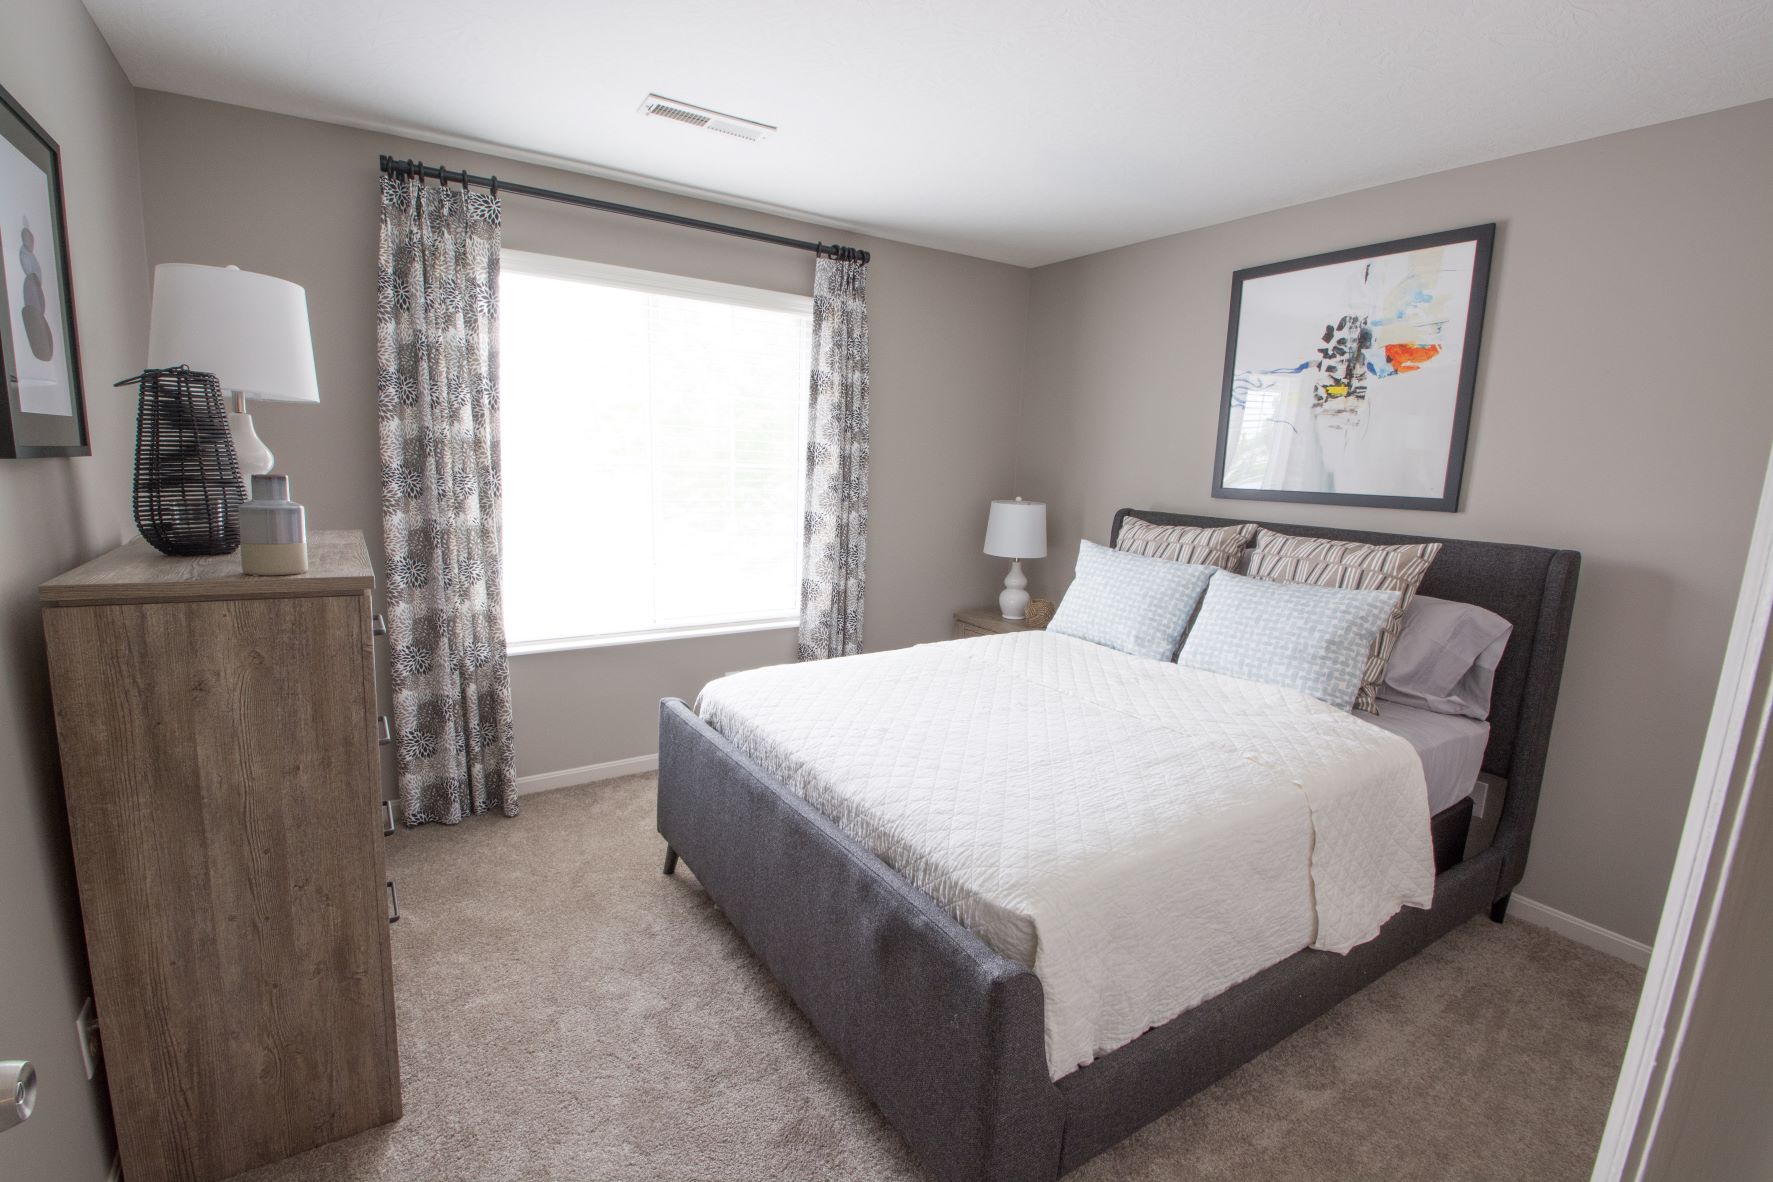 One and Two Bedroom Apartments at Stone Bridge Apartments in Mason, Ohio